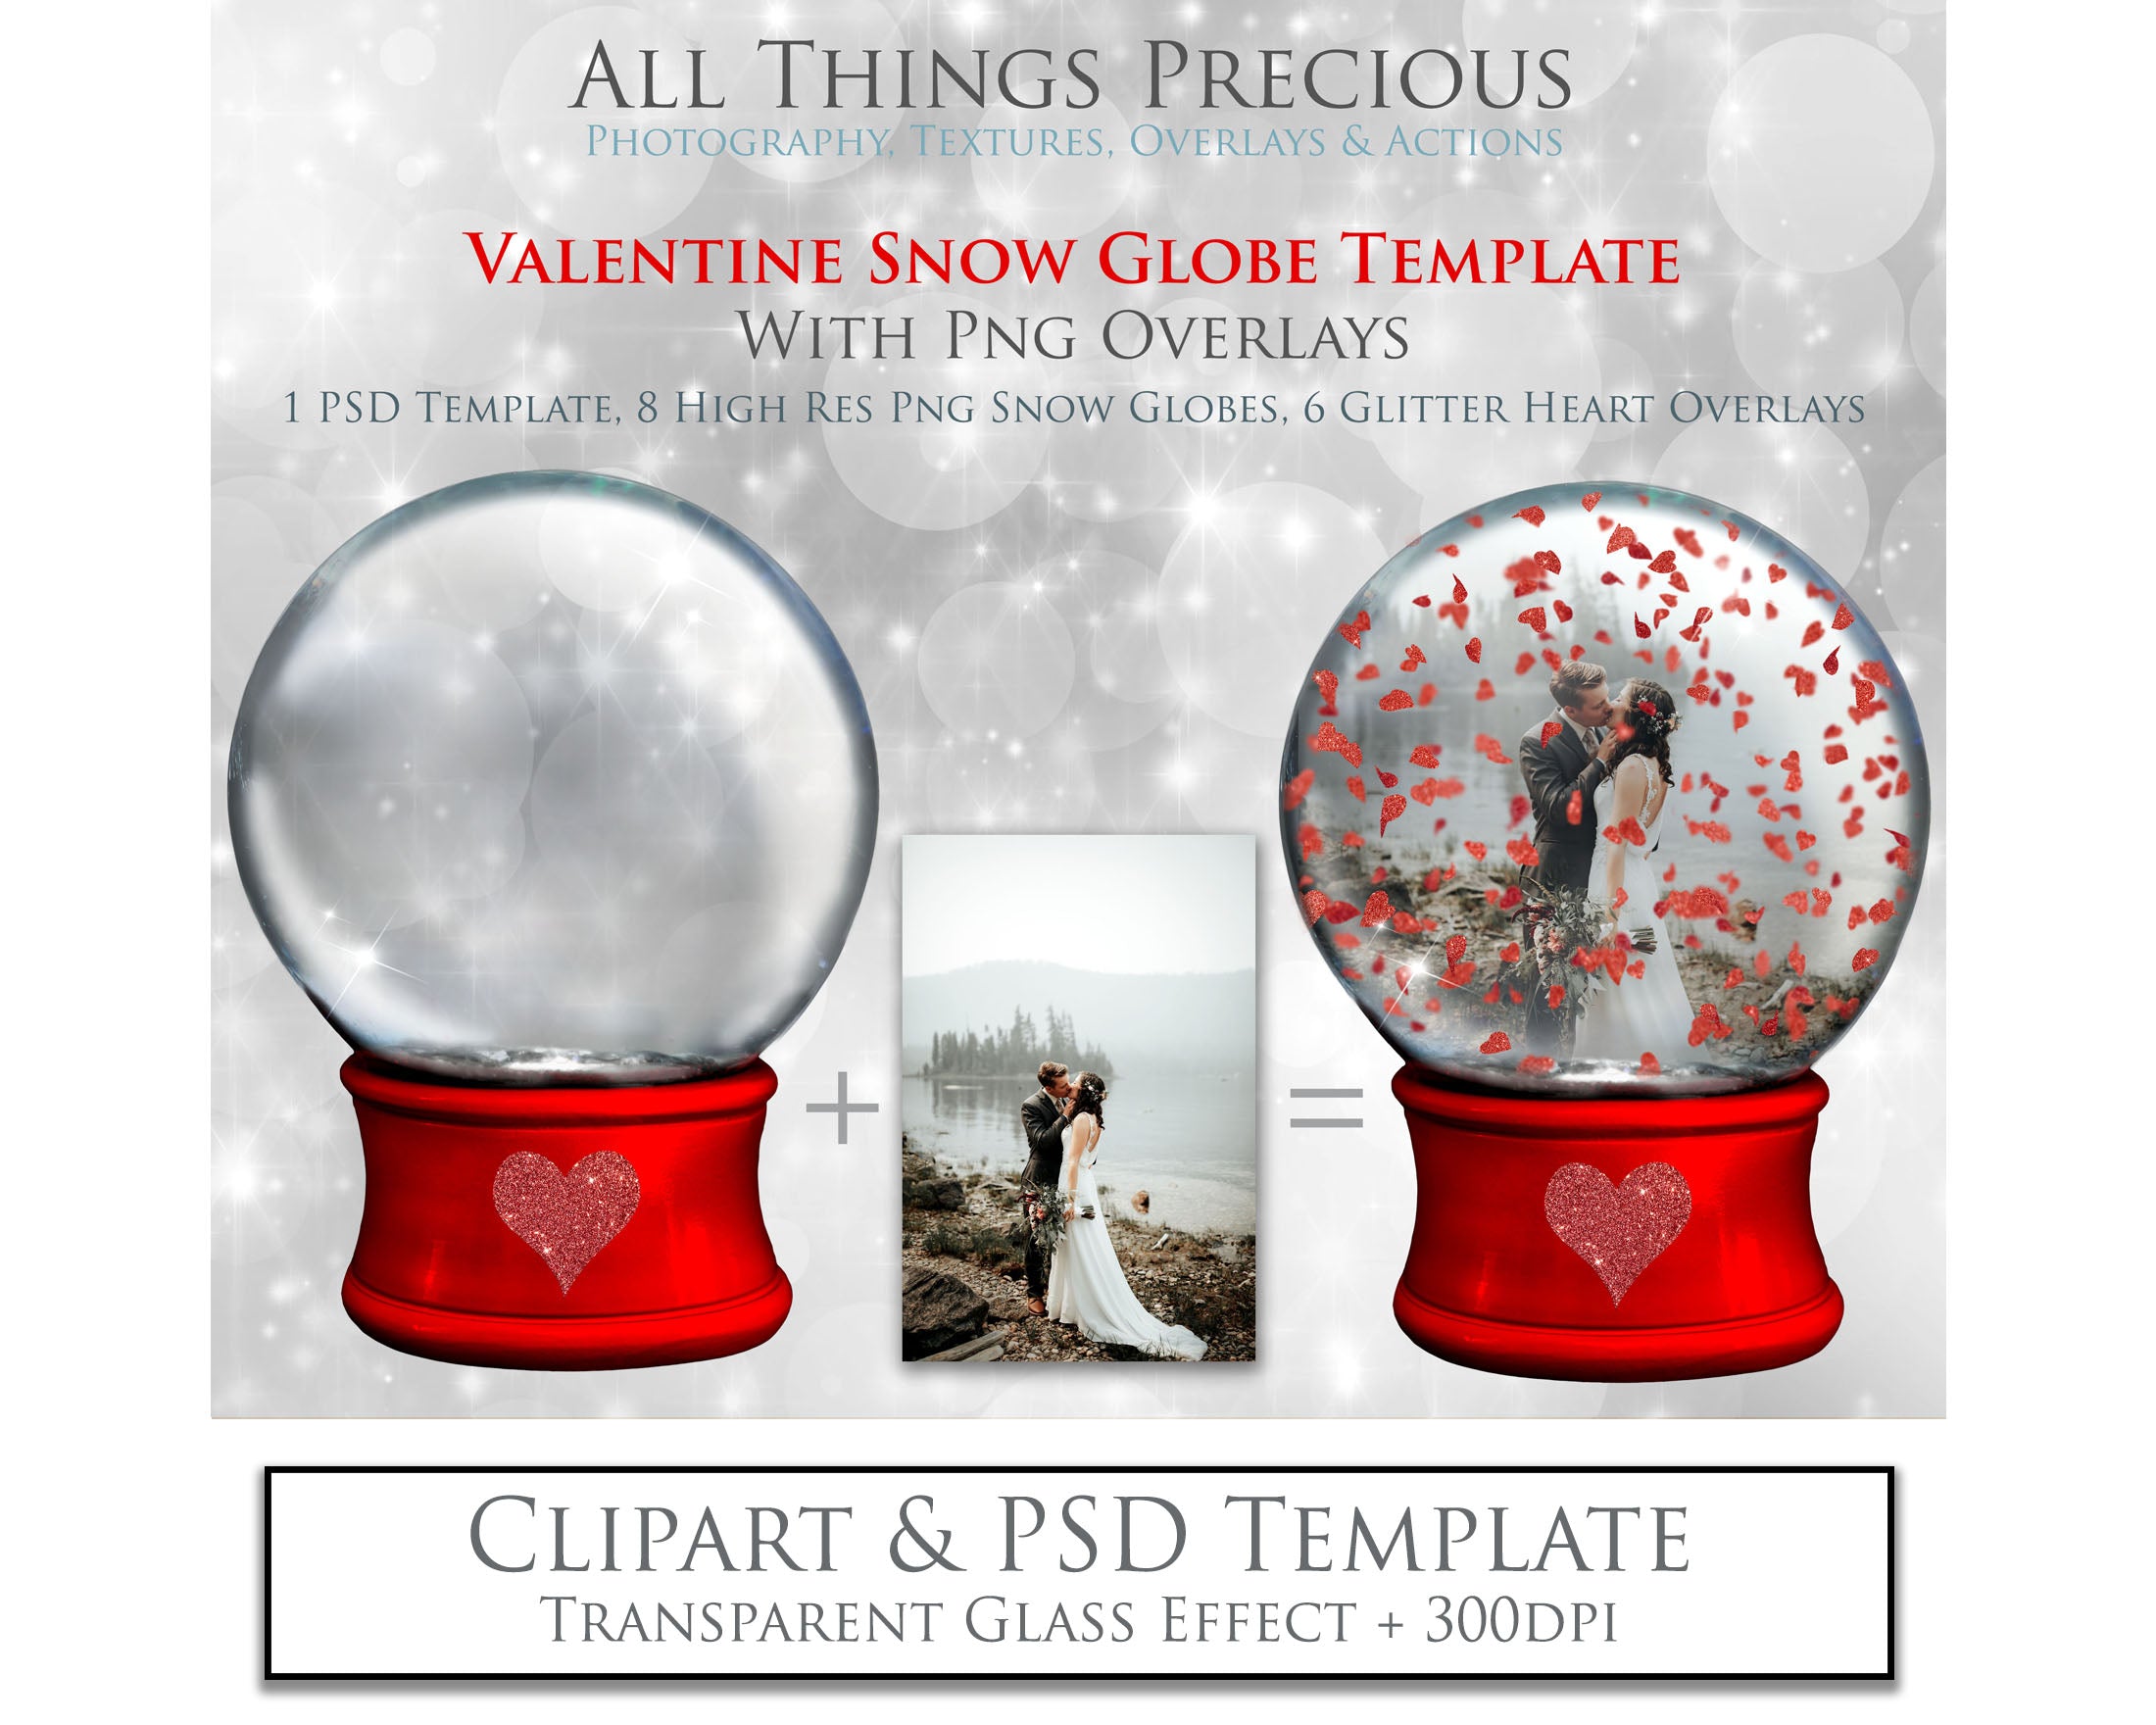 Digital Snow Globe Clipart and Background with snow Overlays and a PSD Template included in the set.The globe is transparent, perfect for you to add your own images and retain the snow globe effect. Photoshop Photography Background. Printable, Editable for Christmas with Santa Window or Glass Globe. ATP Textures VALENTINES